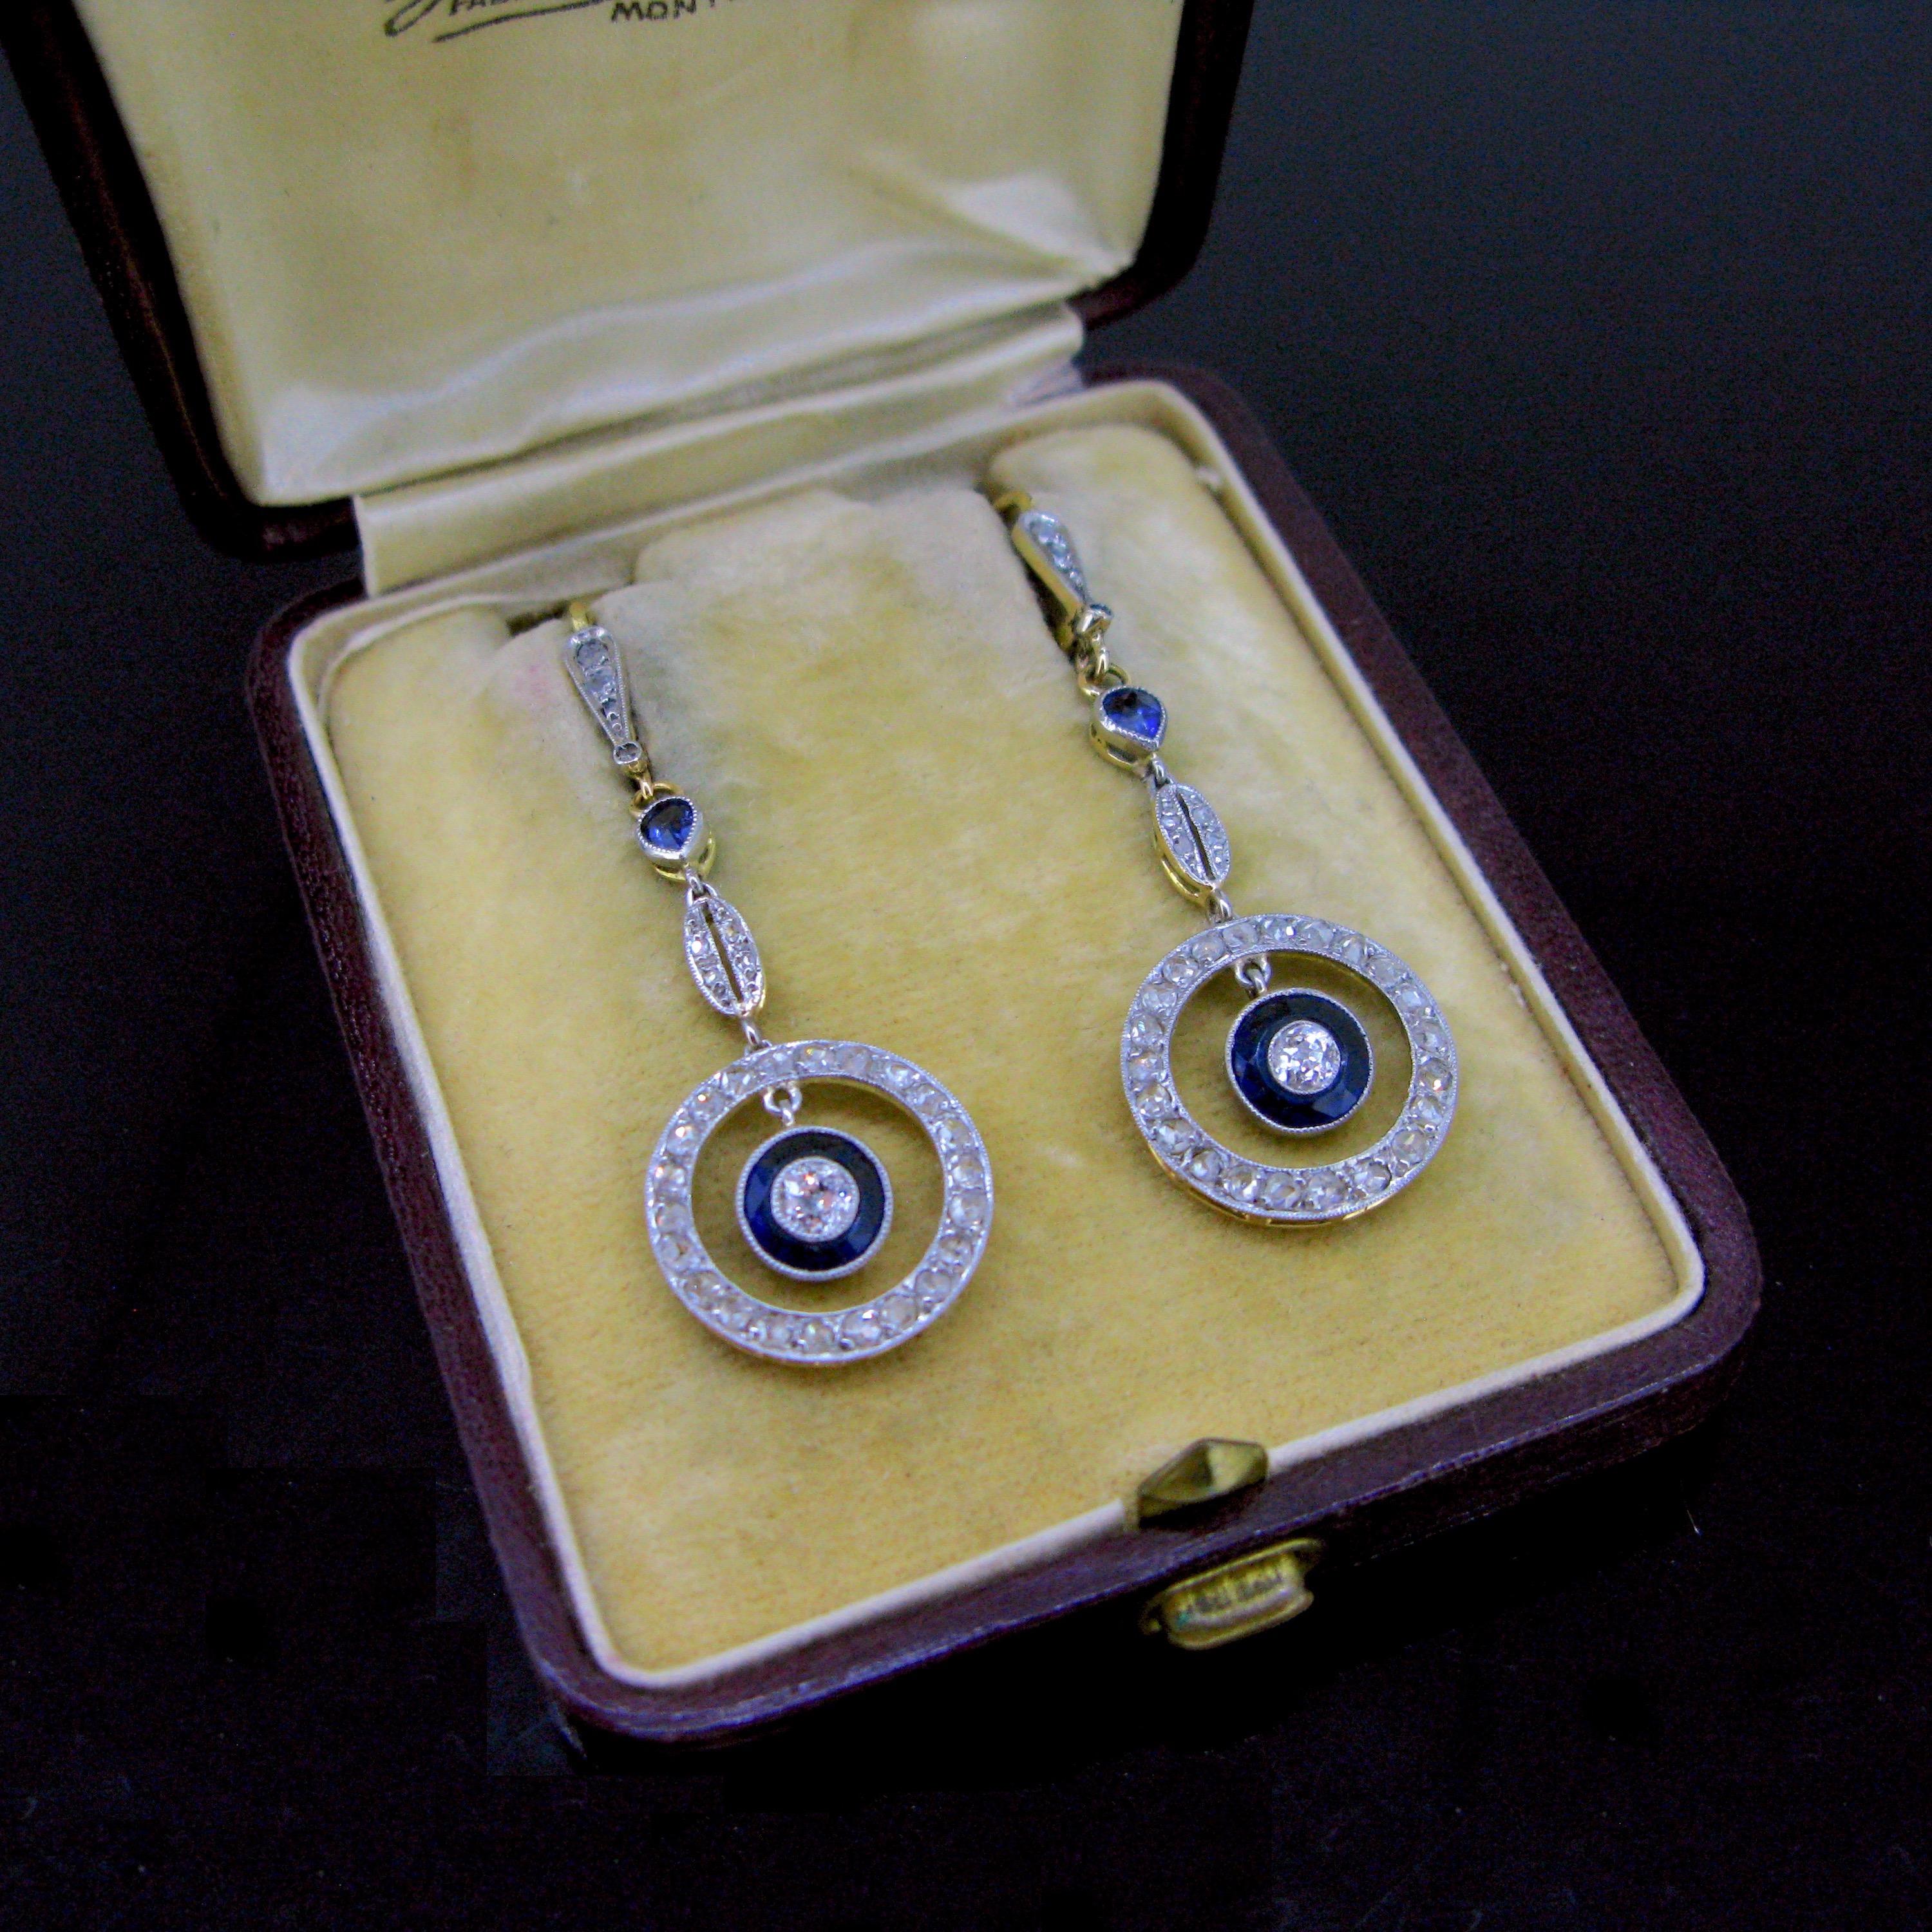 This ravishing pair of earrings is from the Belle Epoque era. They are made in 18kt gold and platinum (tested). Each earring is set with an old cut diamond surrounded by a one piece of carved sapphire. The dangling circle on the bottom is set with